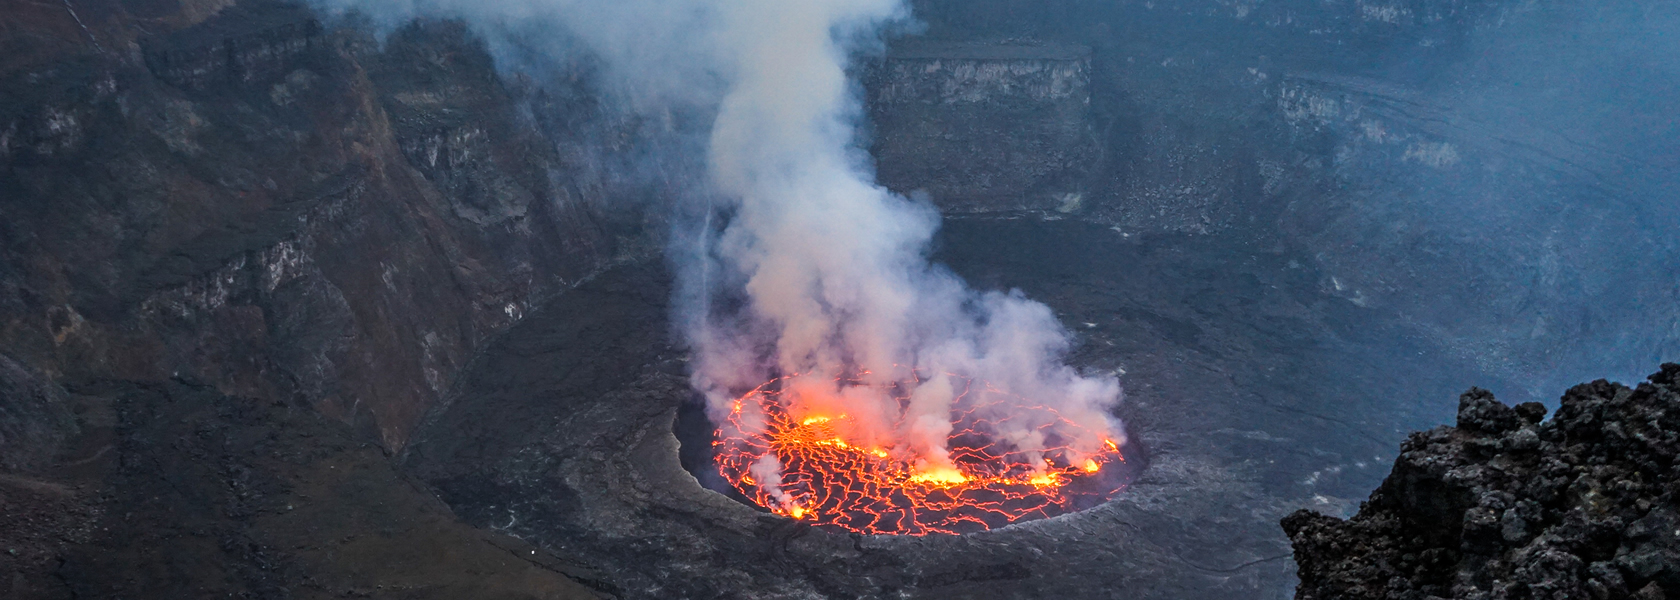 Mount Nyiragongo is an active stratovolcano located inside Virunga National Park In The Democratic Republic Of The Congo. The Volcano Is Just 20 Km North Of Goma Town and Lake Kivu